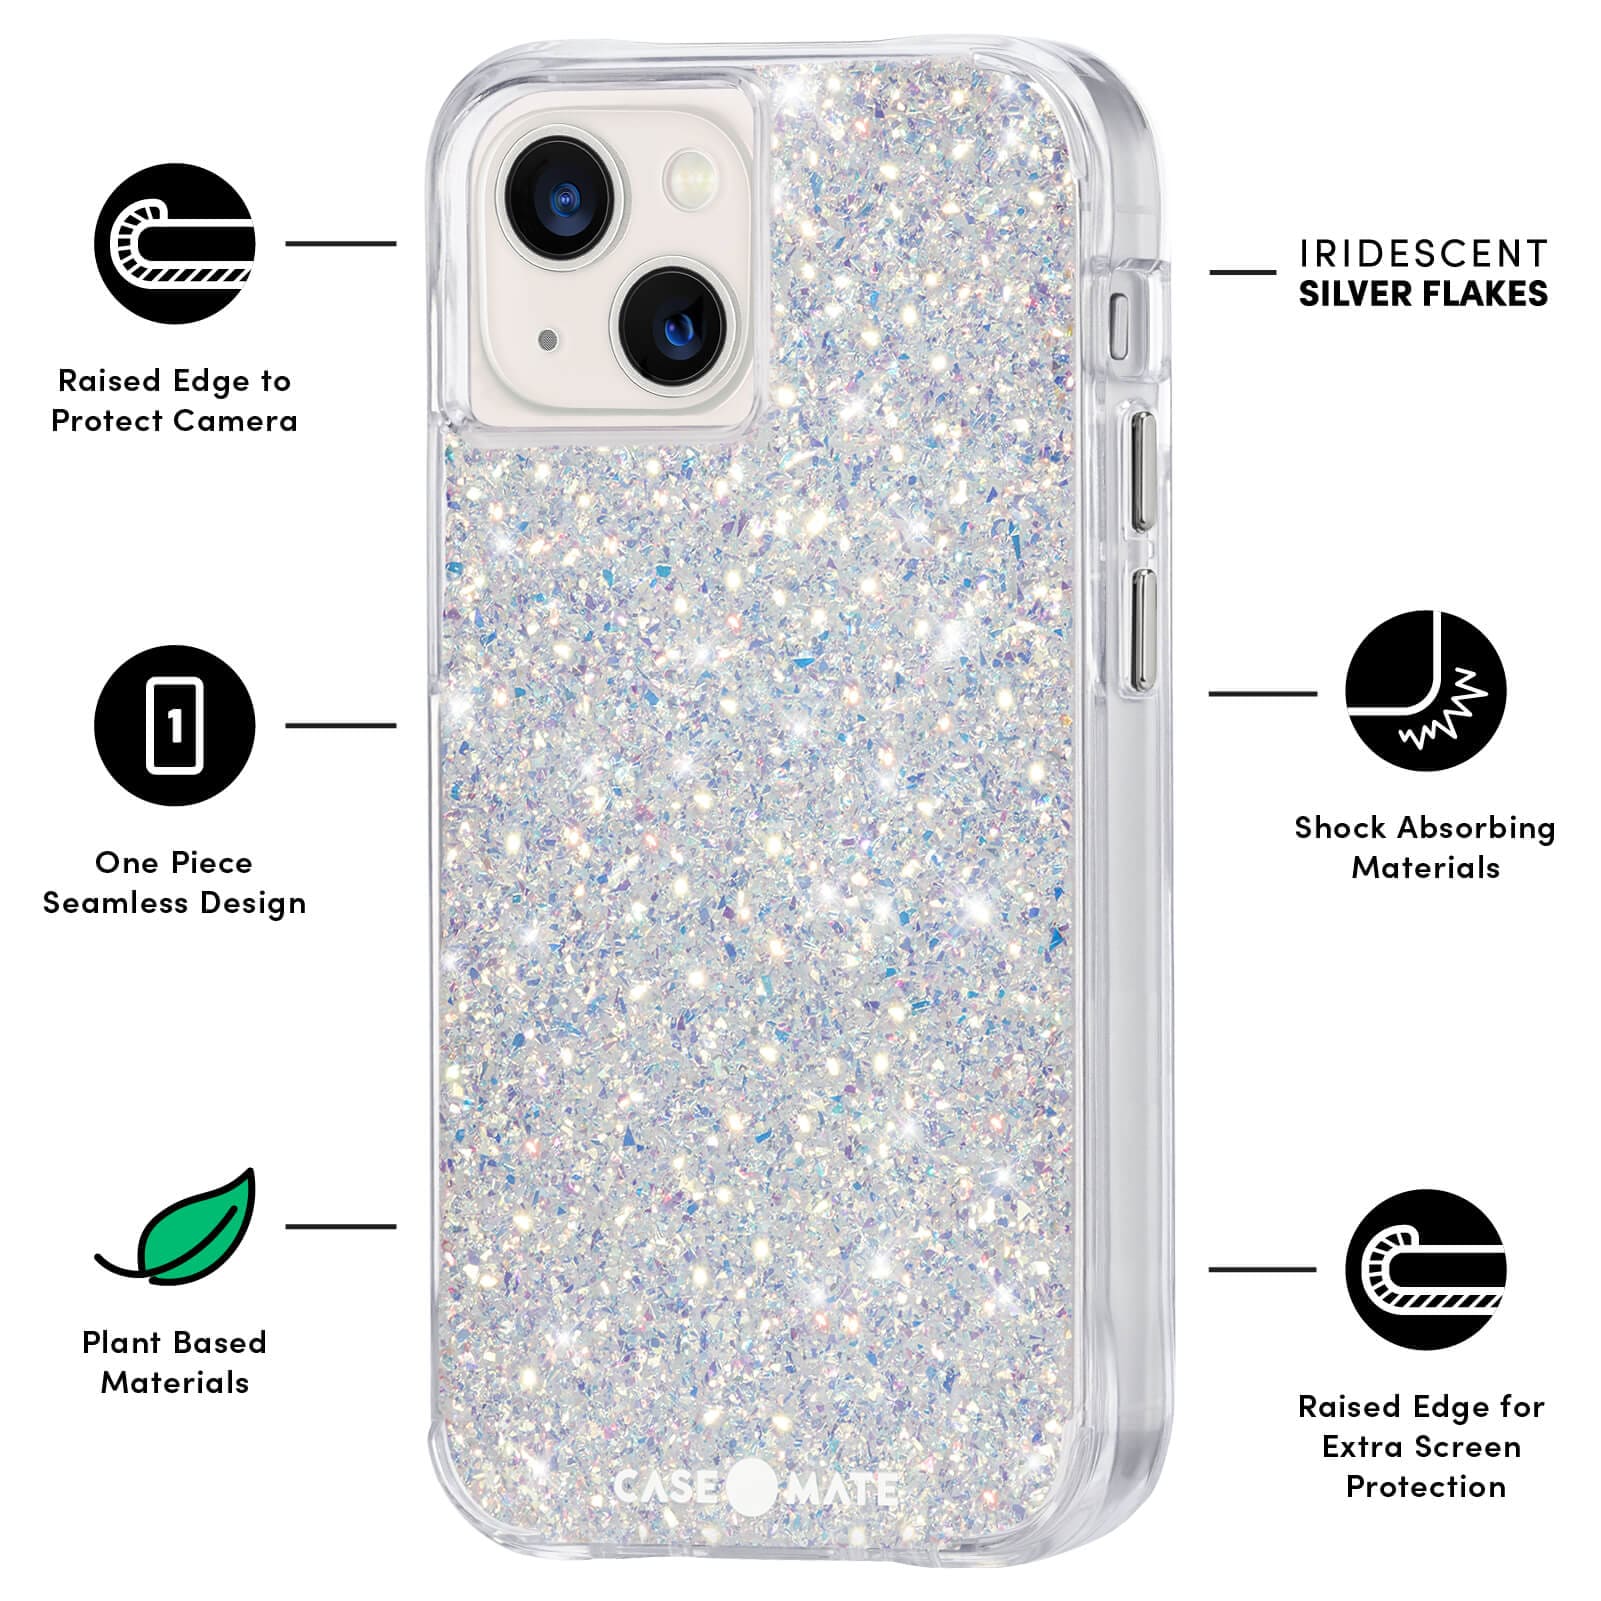 FEATURES: RAISED EDGE TO PROTECT CAMERA, ONE PIECE SEAMLESS DESIGN, PLANT BASED MATERIALS, IRIDESCENT SILVER FLAKES, SHOCK ABSORBING MATERIALS, RAISED EDGE FOR EXTRA SCREEN PROTECTION. COLOR::TWINKLE STARDUST